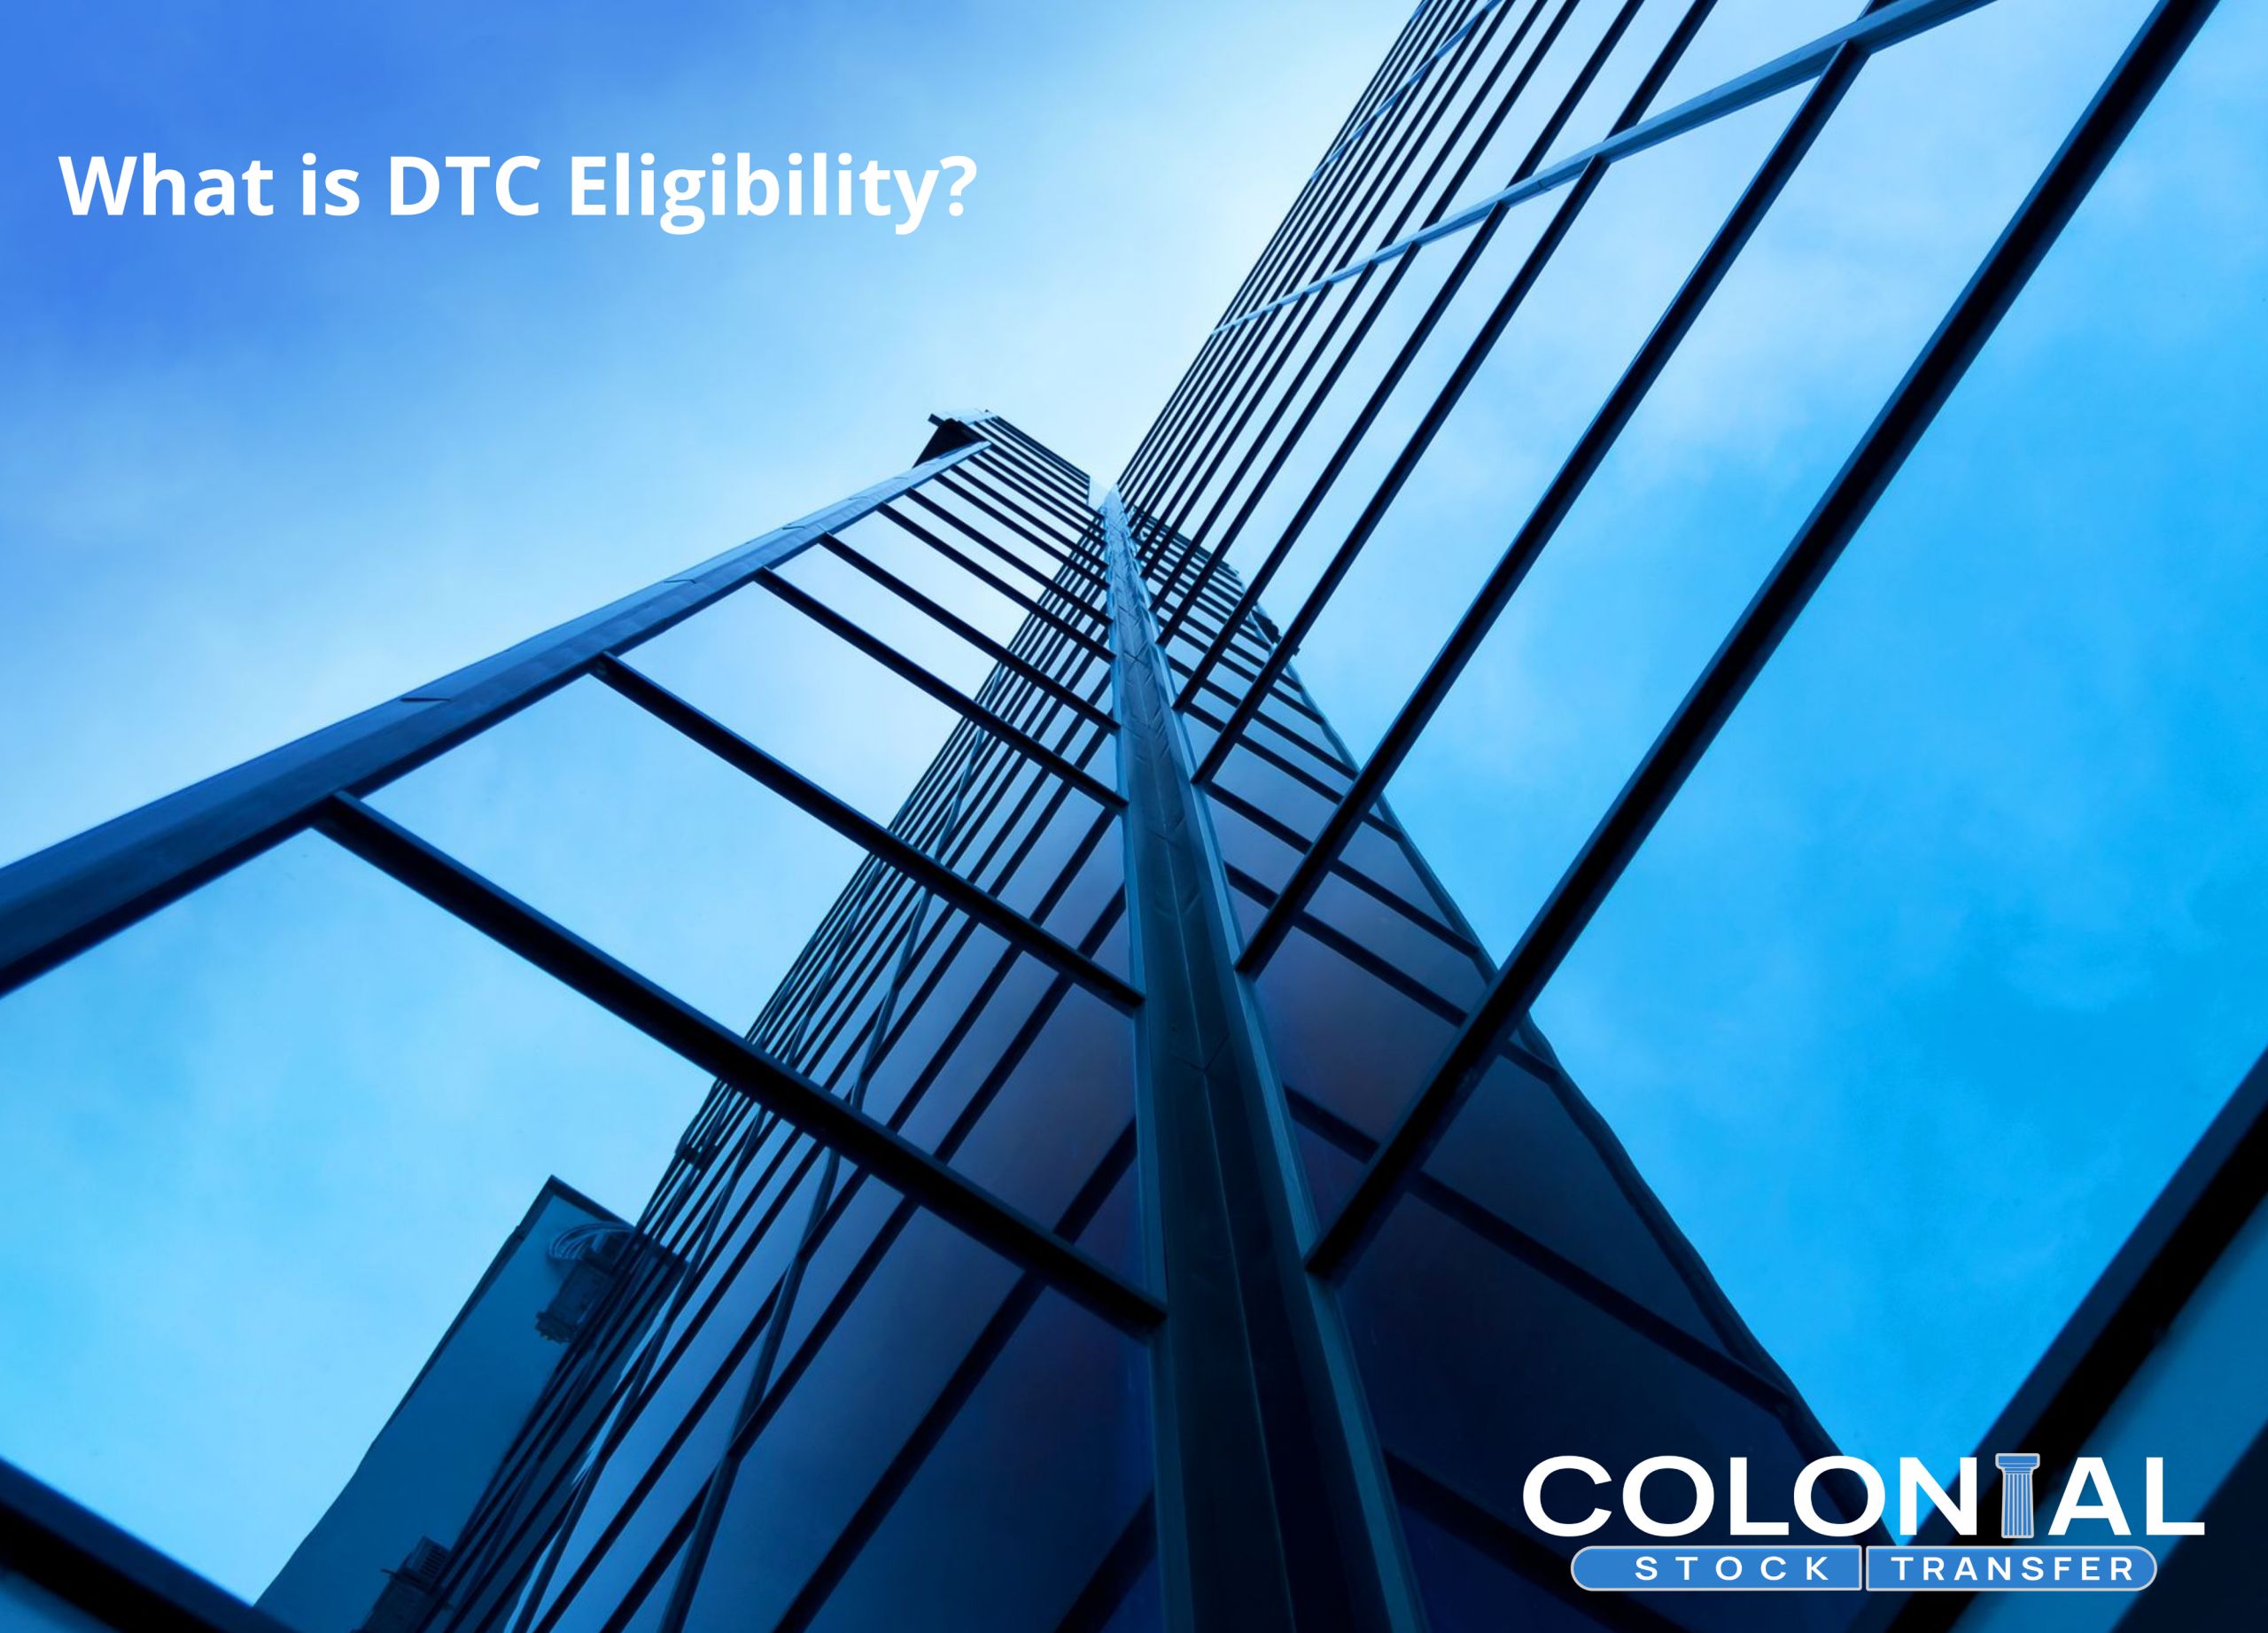 What is DTC Eligibility?